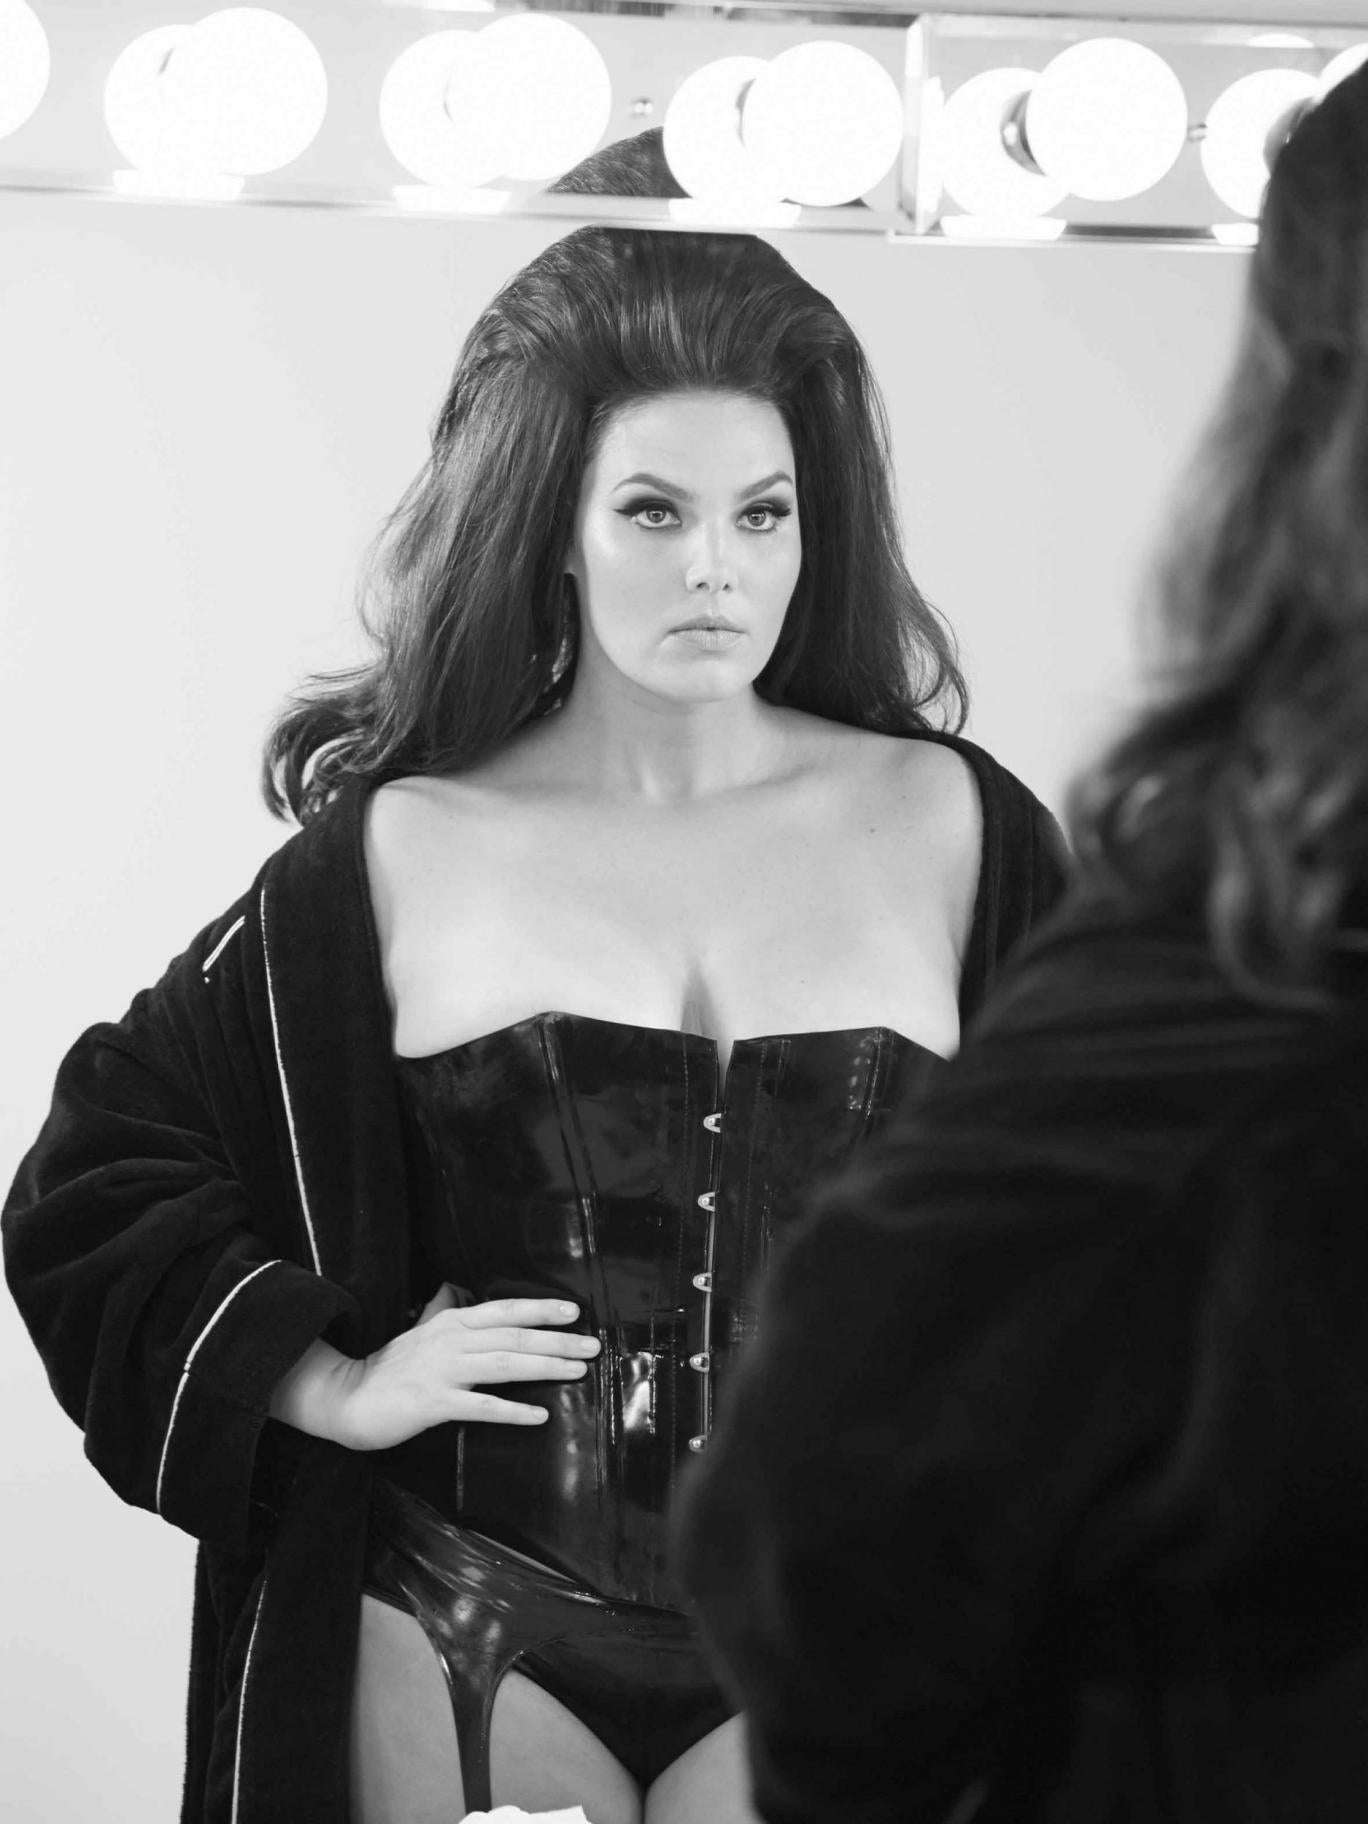 Candice Huffine on Pirelli Calendar 2015, photographed by Steven Meisel